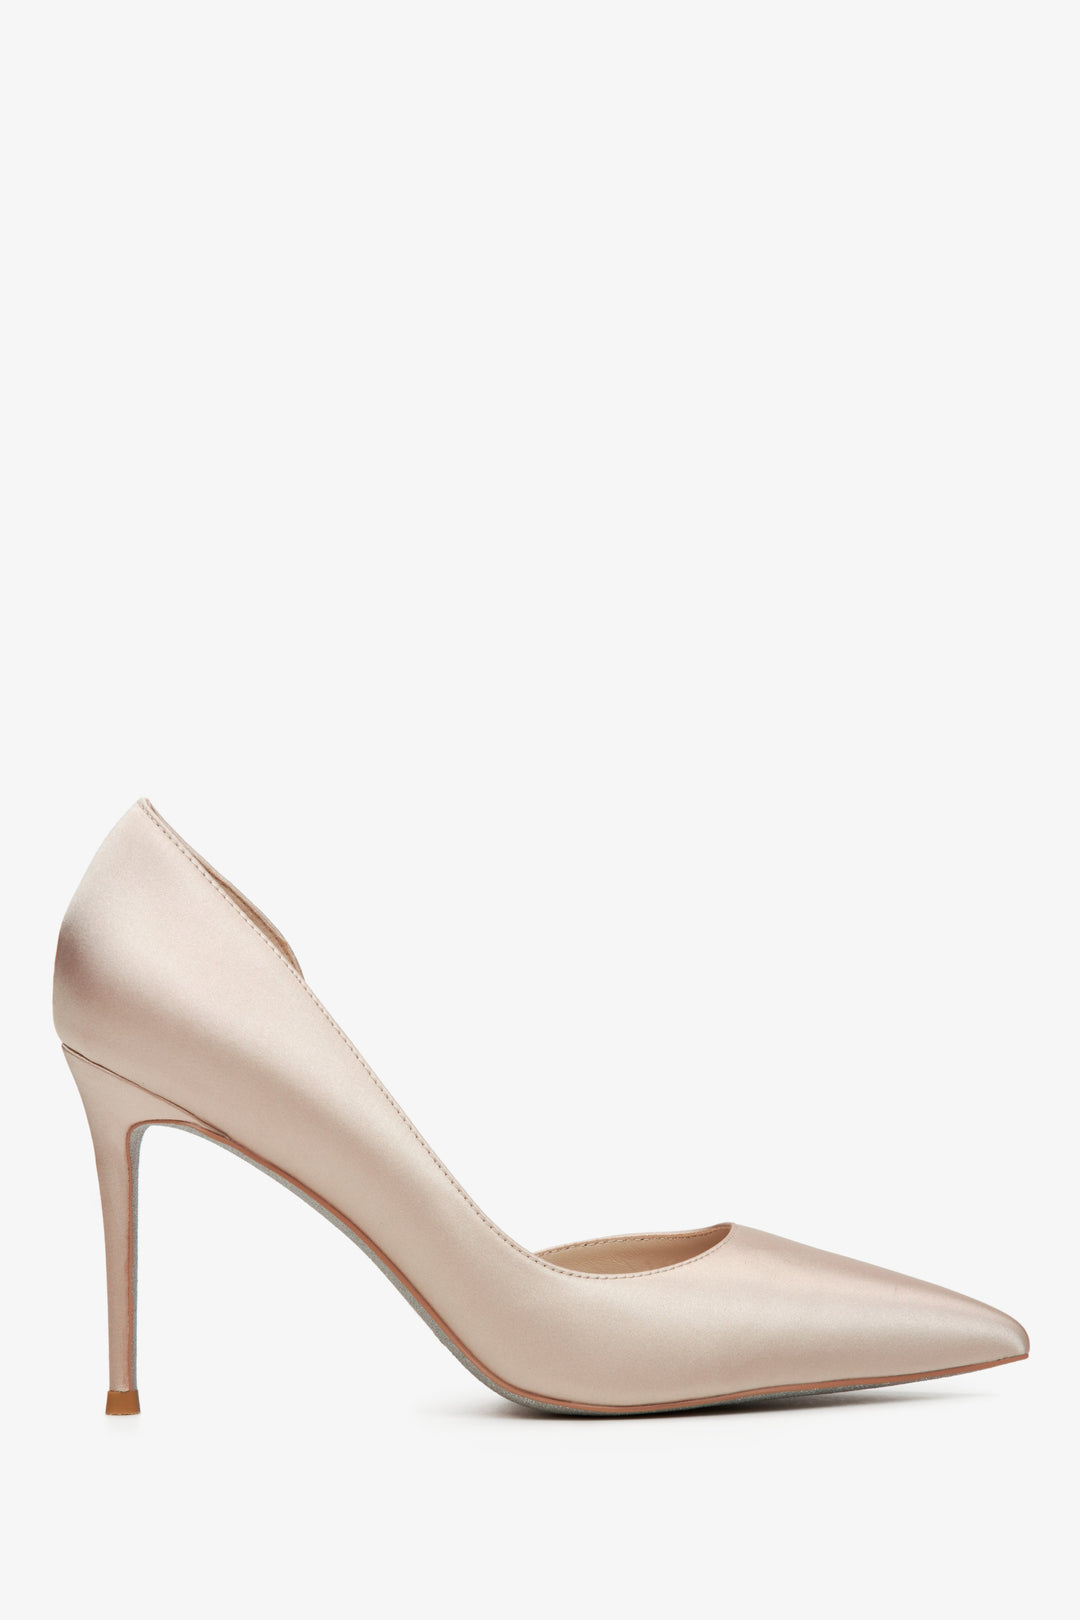 Women's Powder Pink Pointed Toe High Heels with Satin Finish Estro ER00114768.